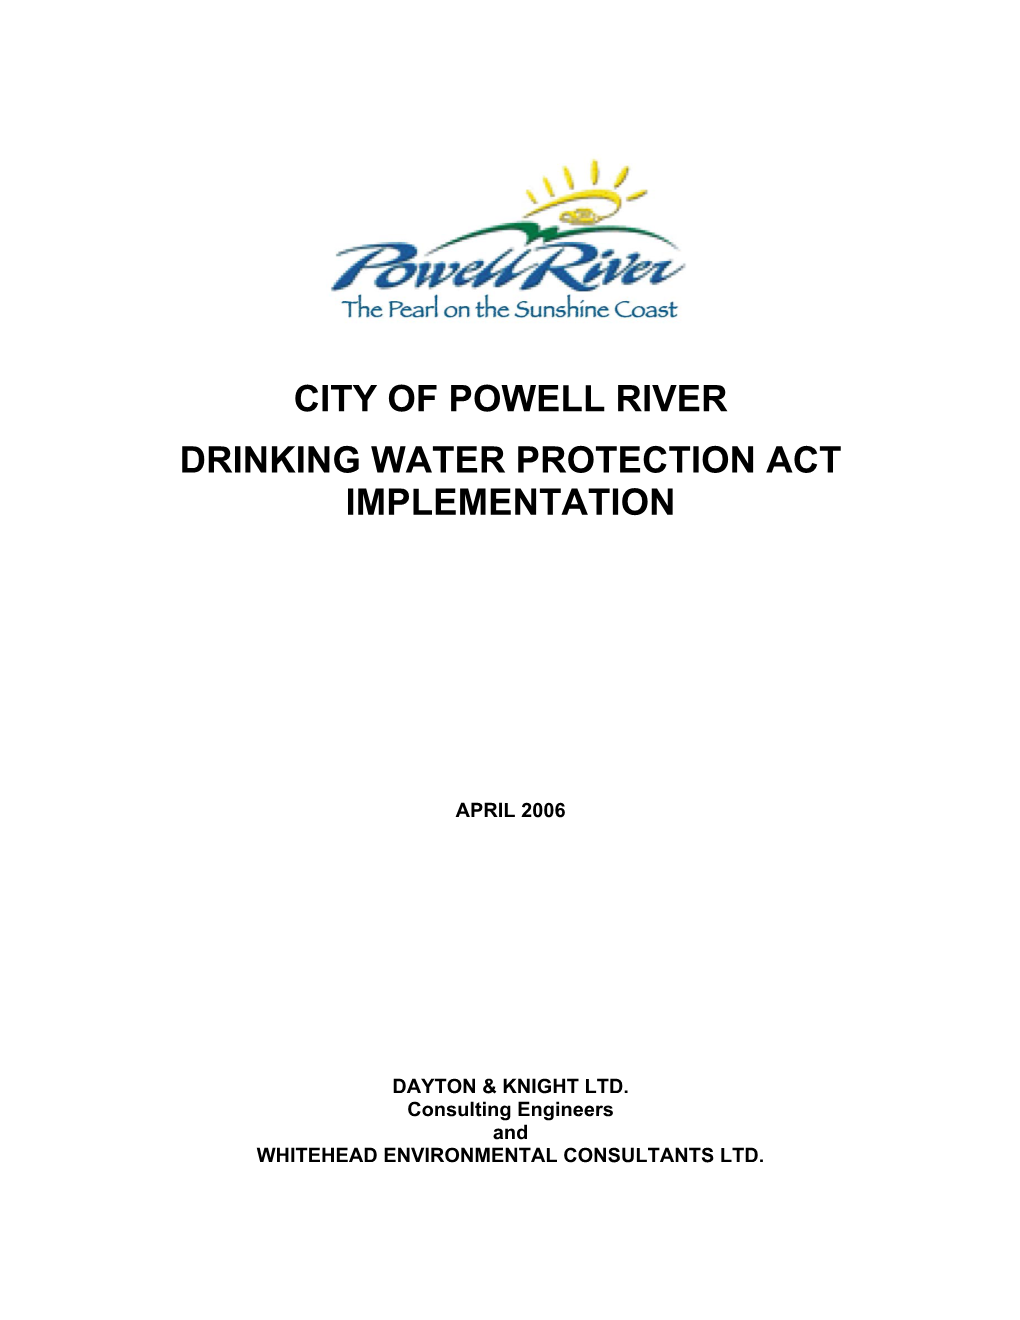 Drinking Water Protection Act Implementation